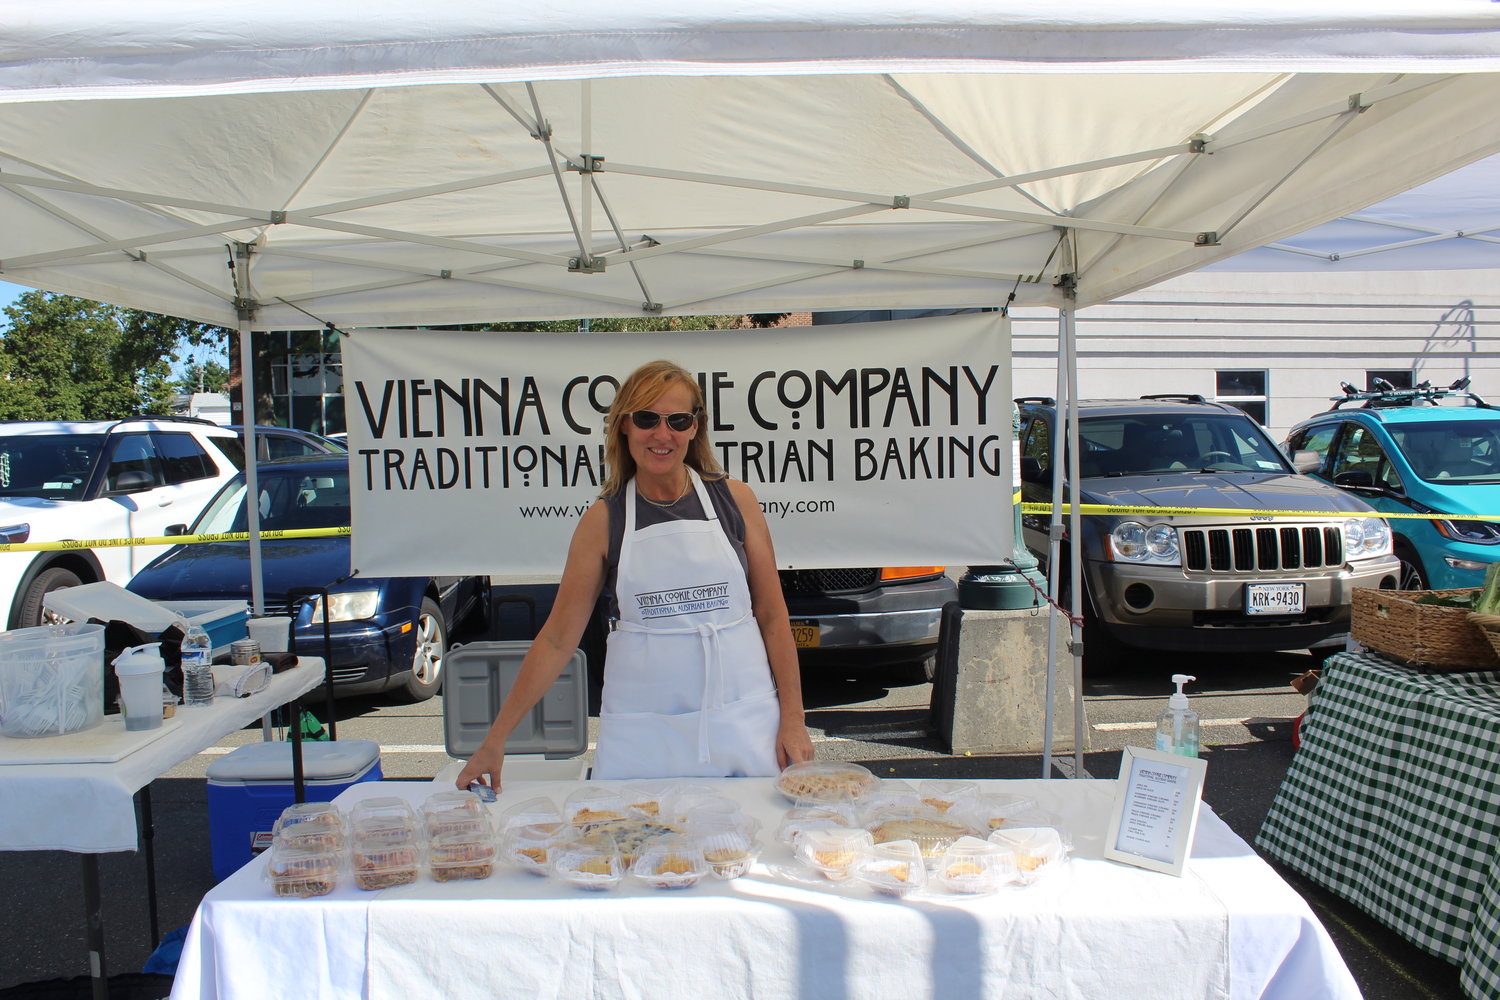 Vienna Cookie Company, an Austrian dessert vendor, greeted the crowd and shared delicacies.